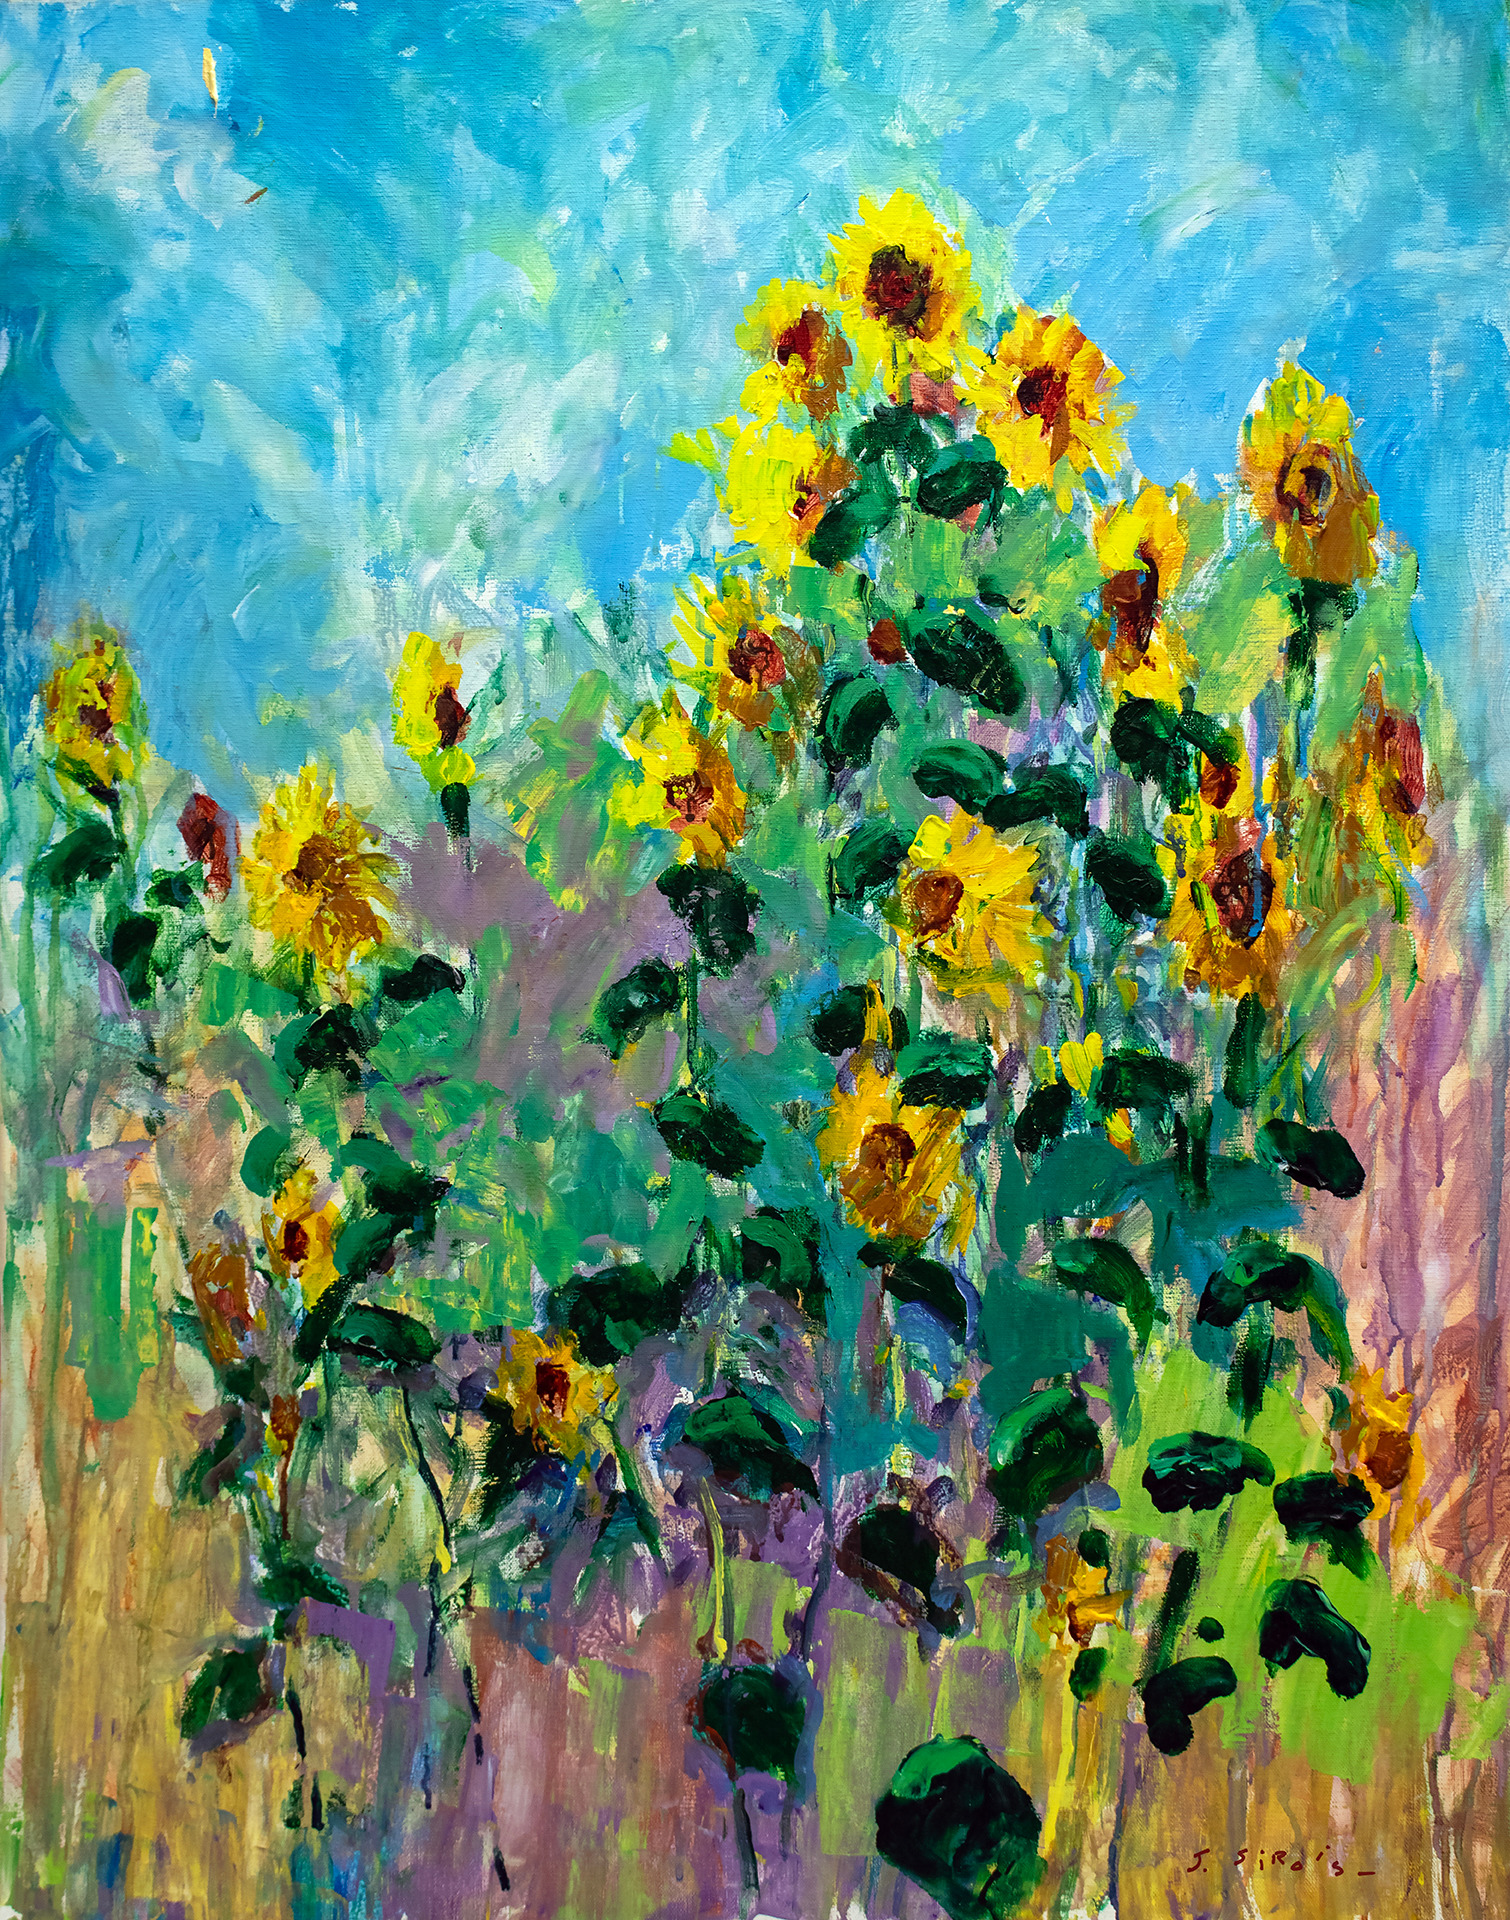  mg 2087 sunflowers in the field 24x30 sm 72ppi aeozuv